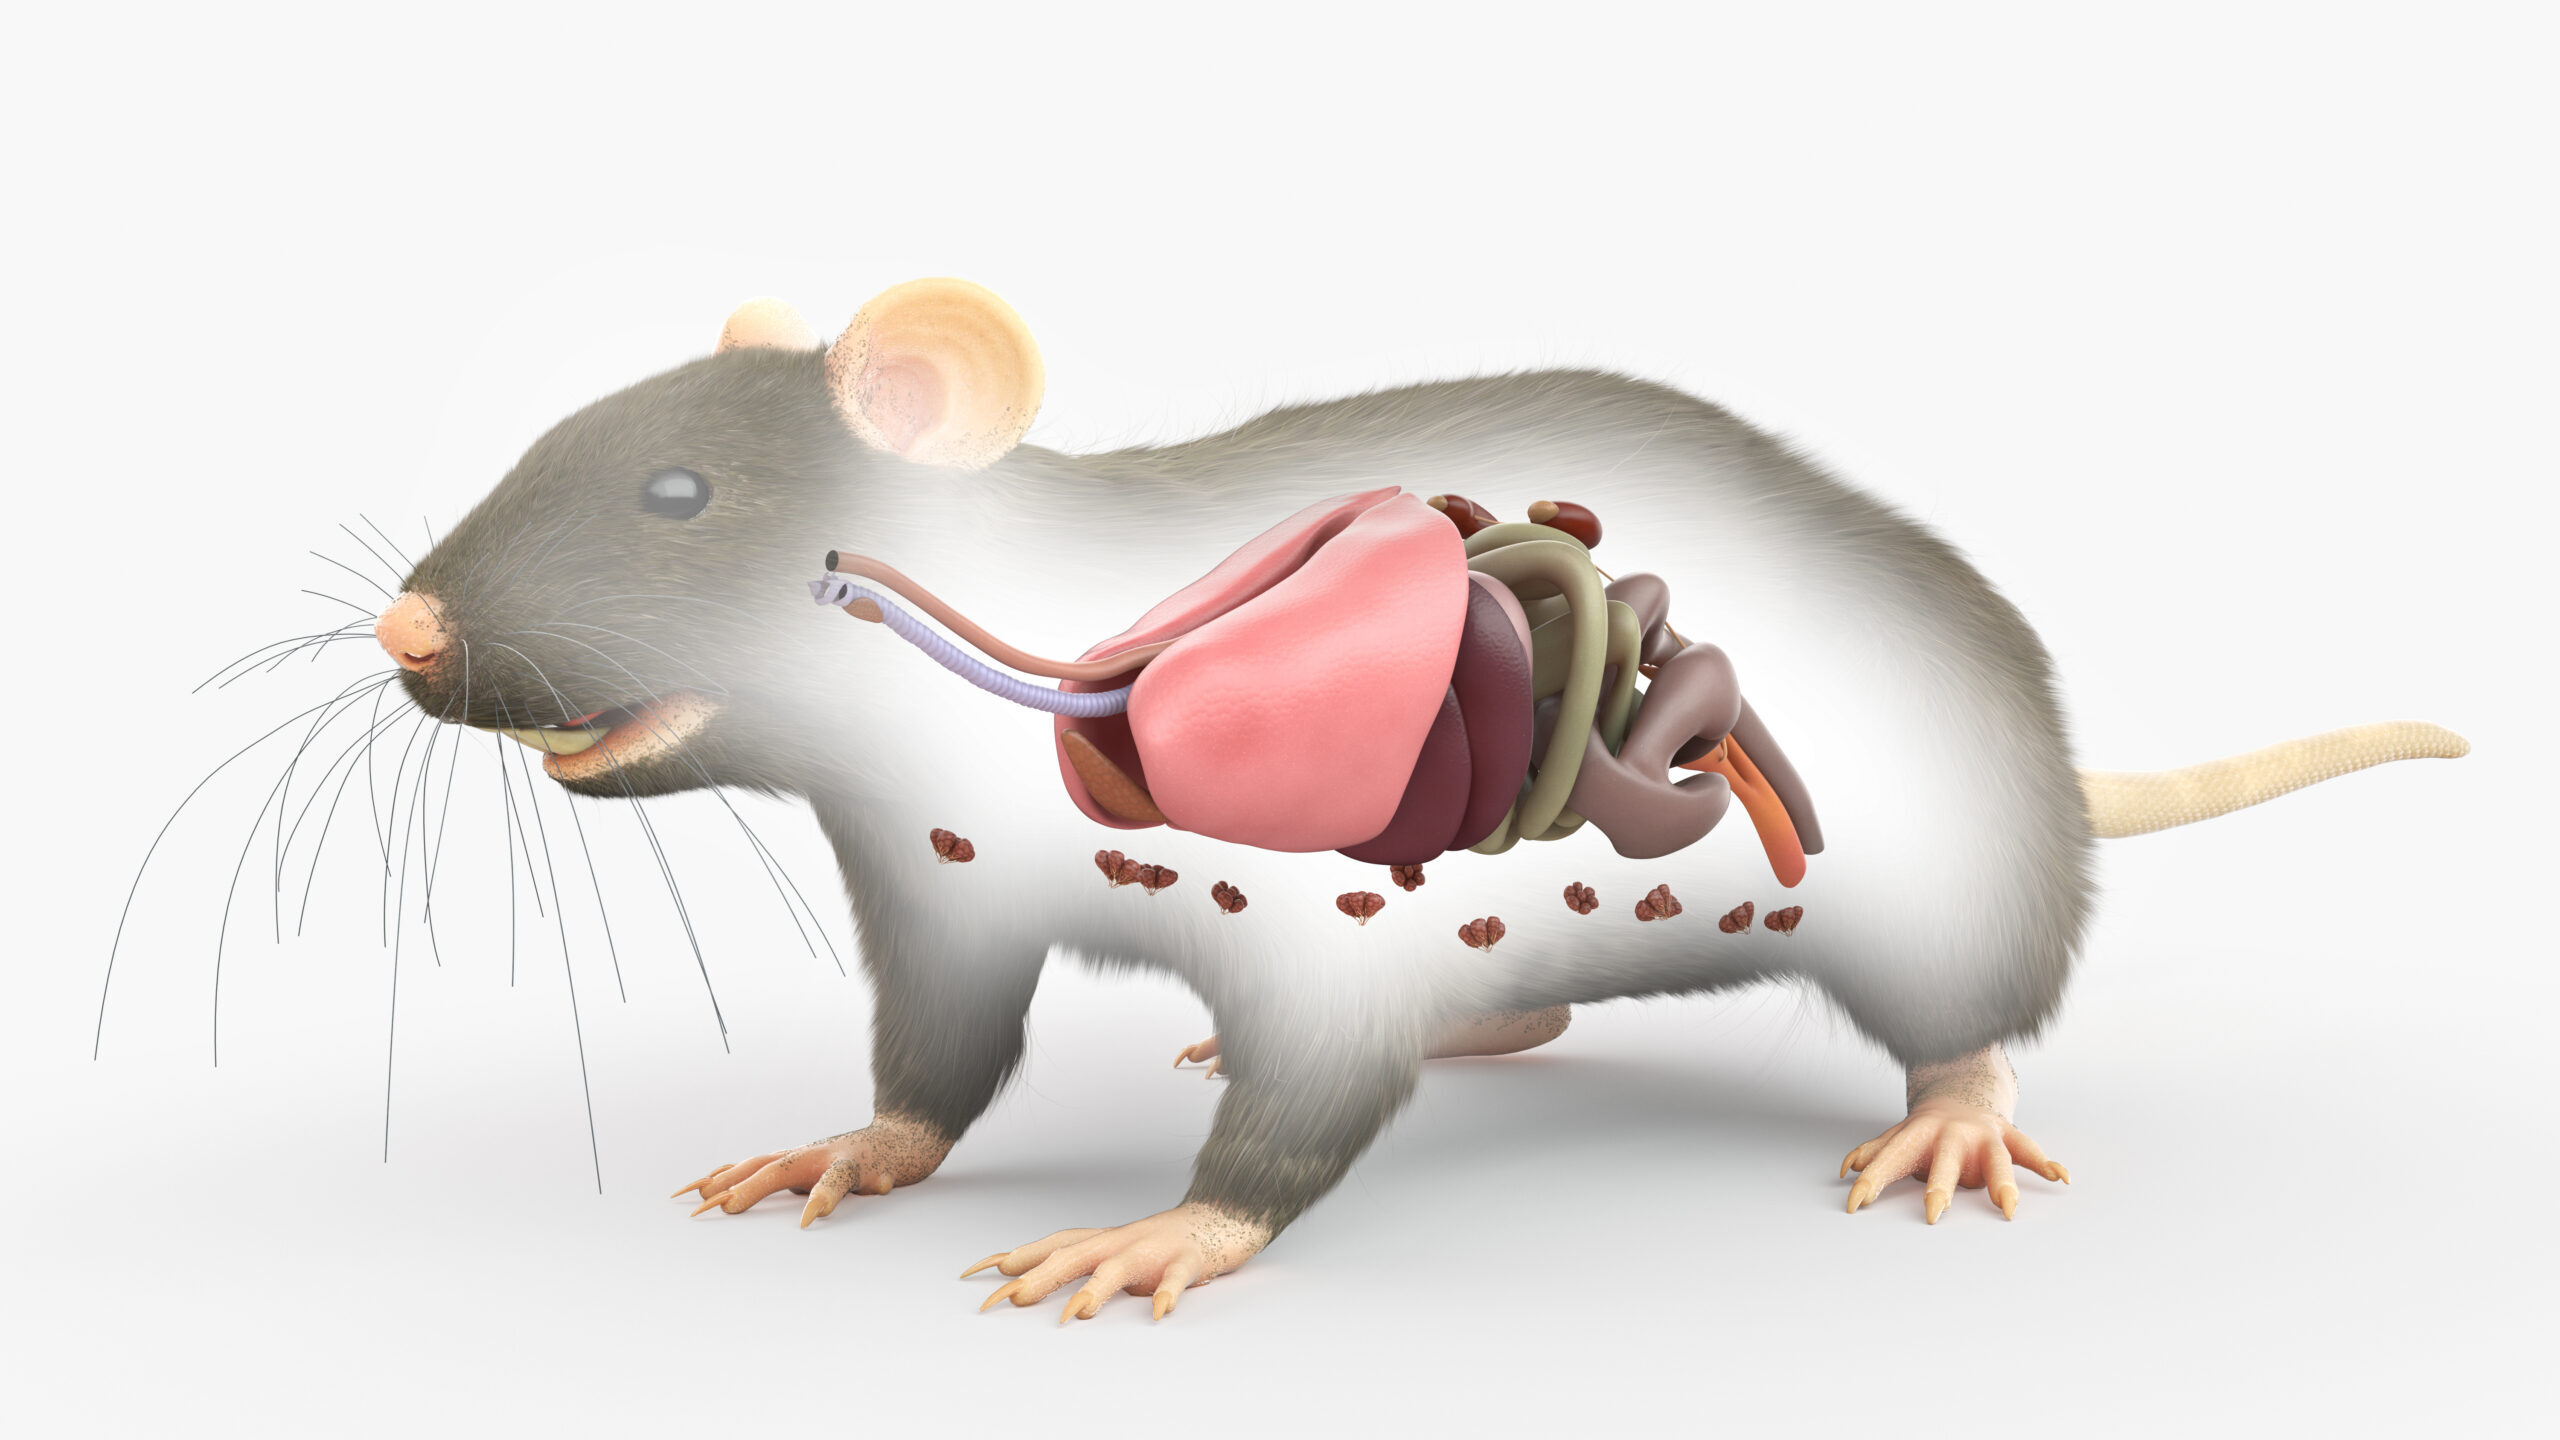 3d rendered illustration of a rats anatomy - the organs